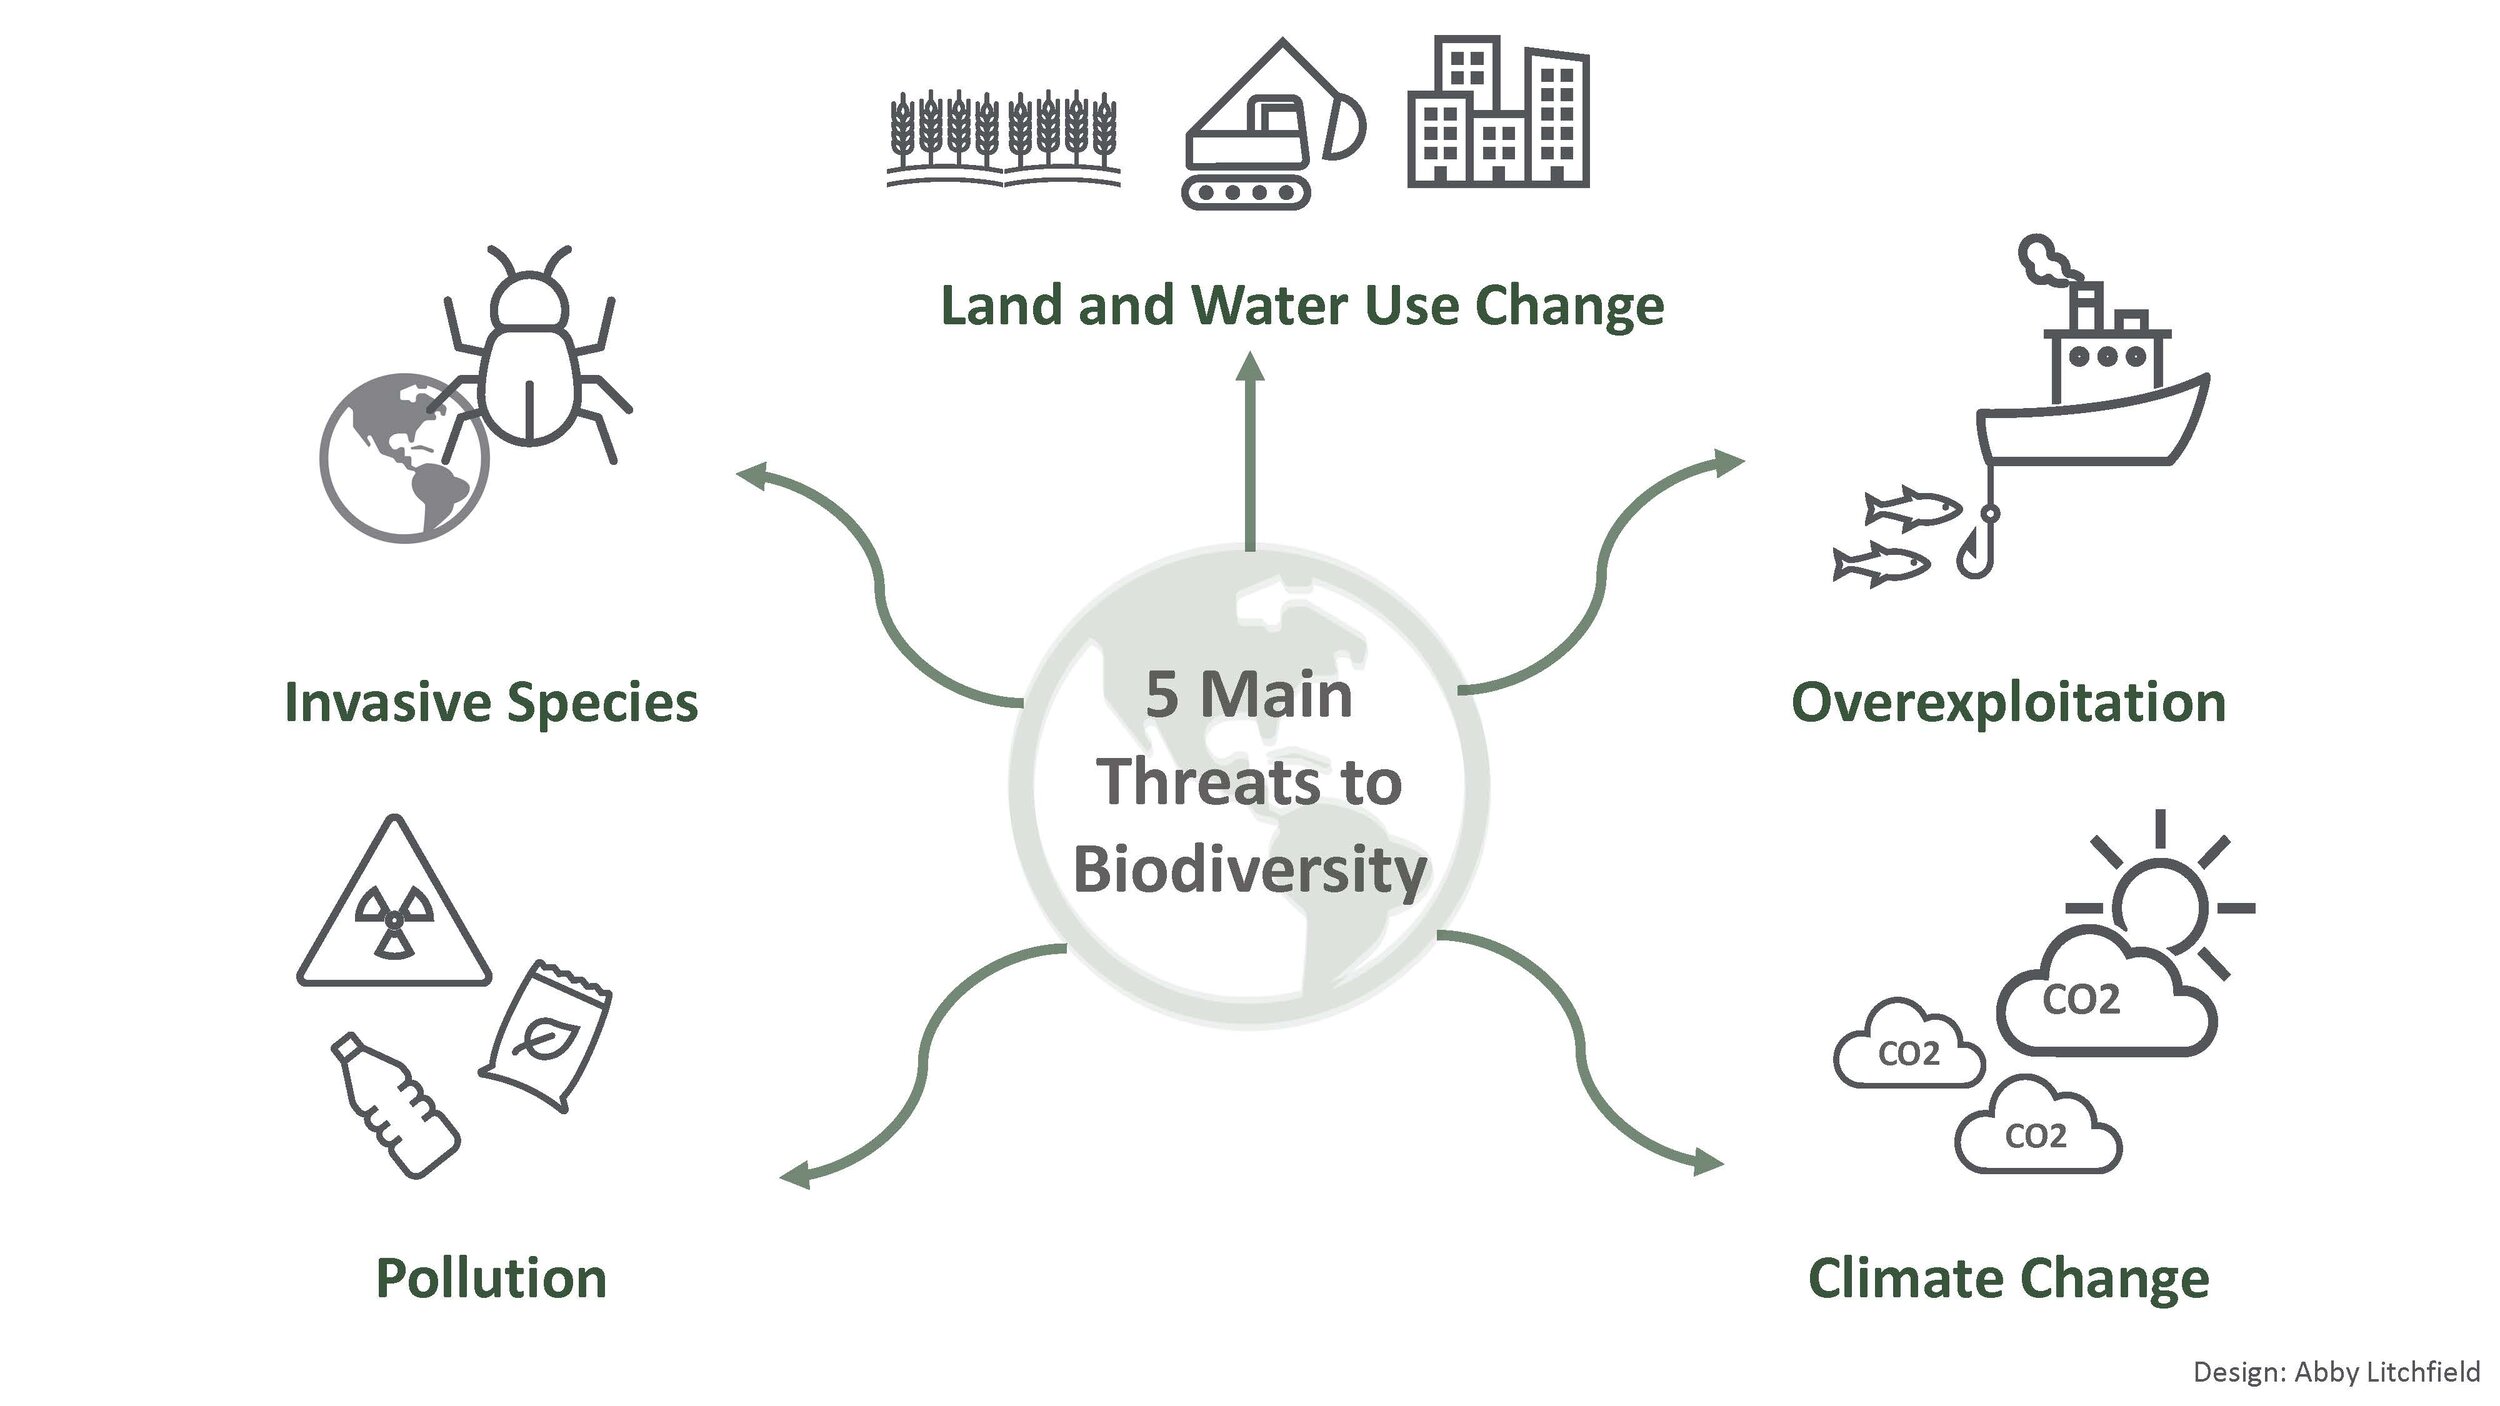 II. The Current State of Biodiversity